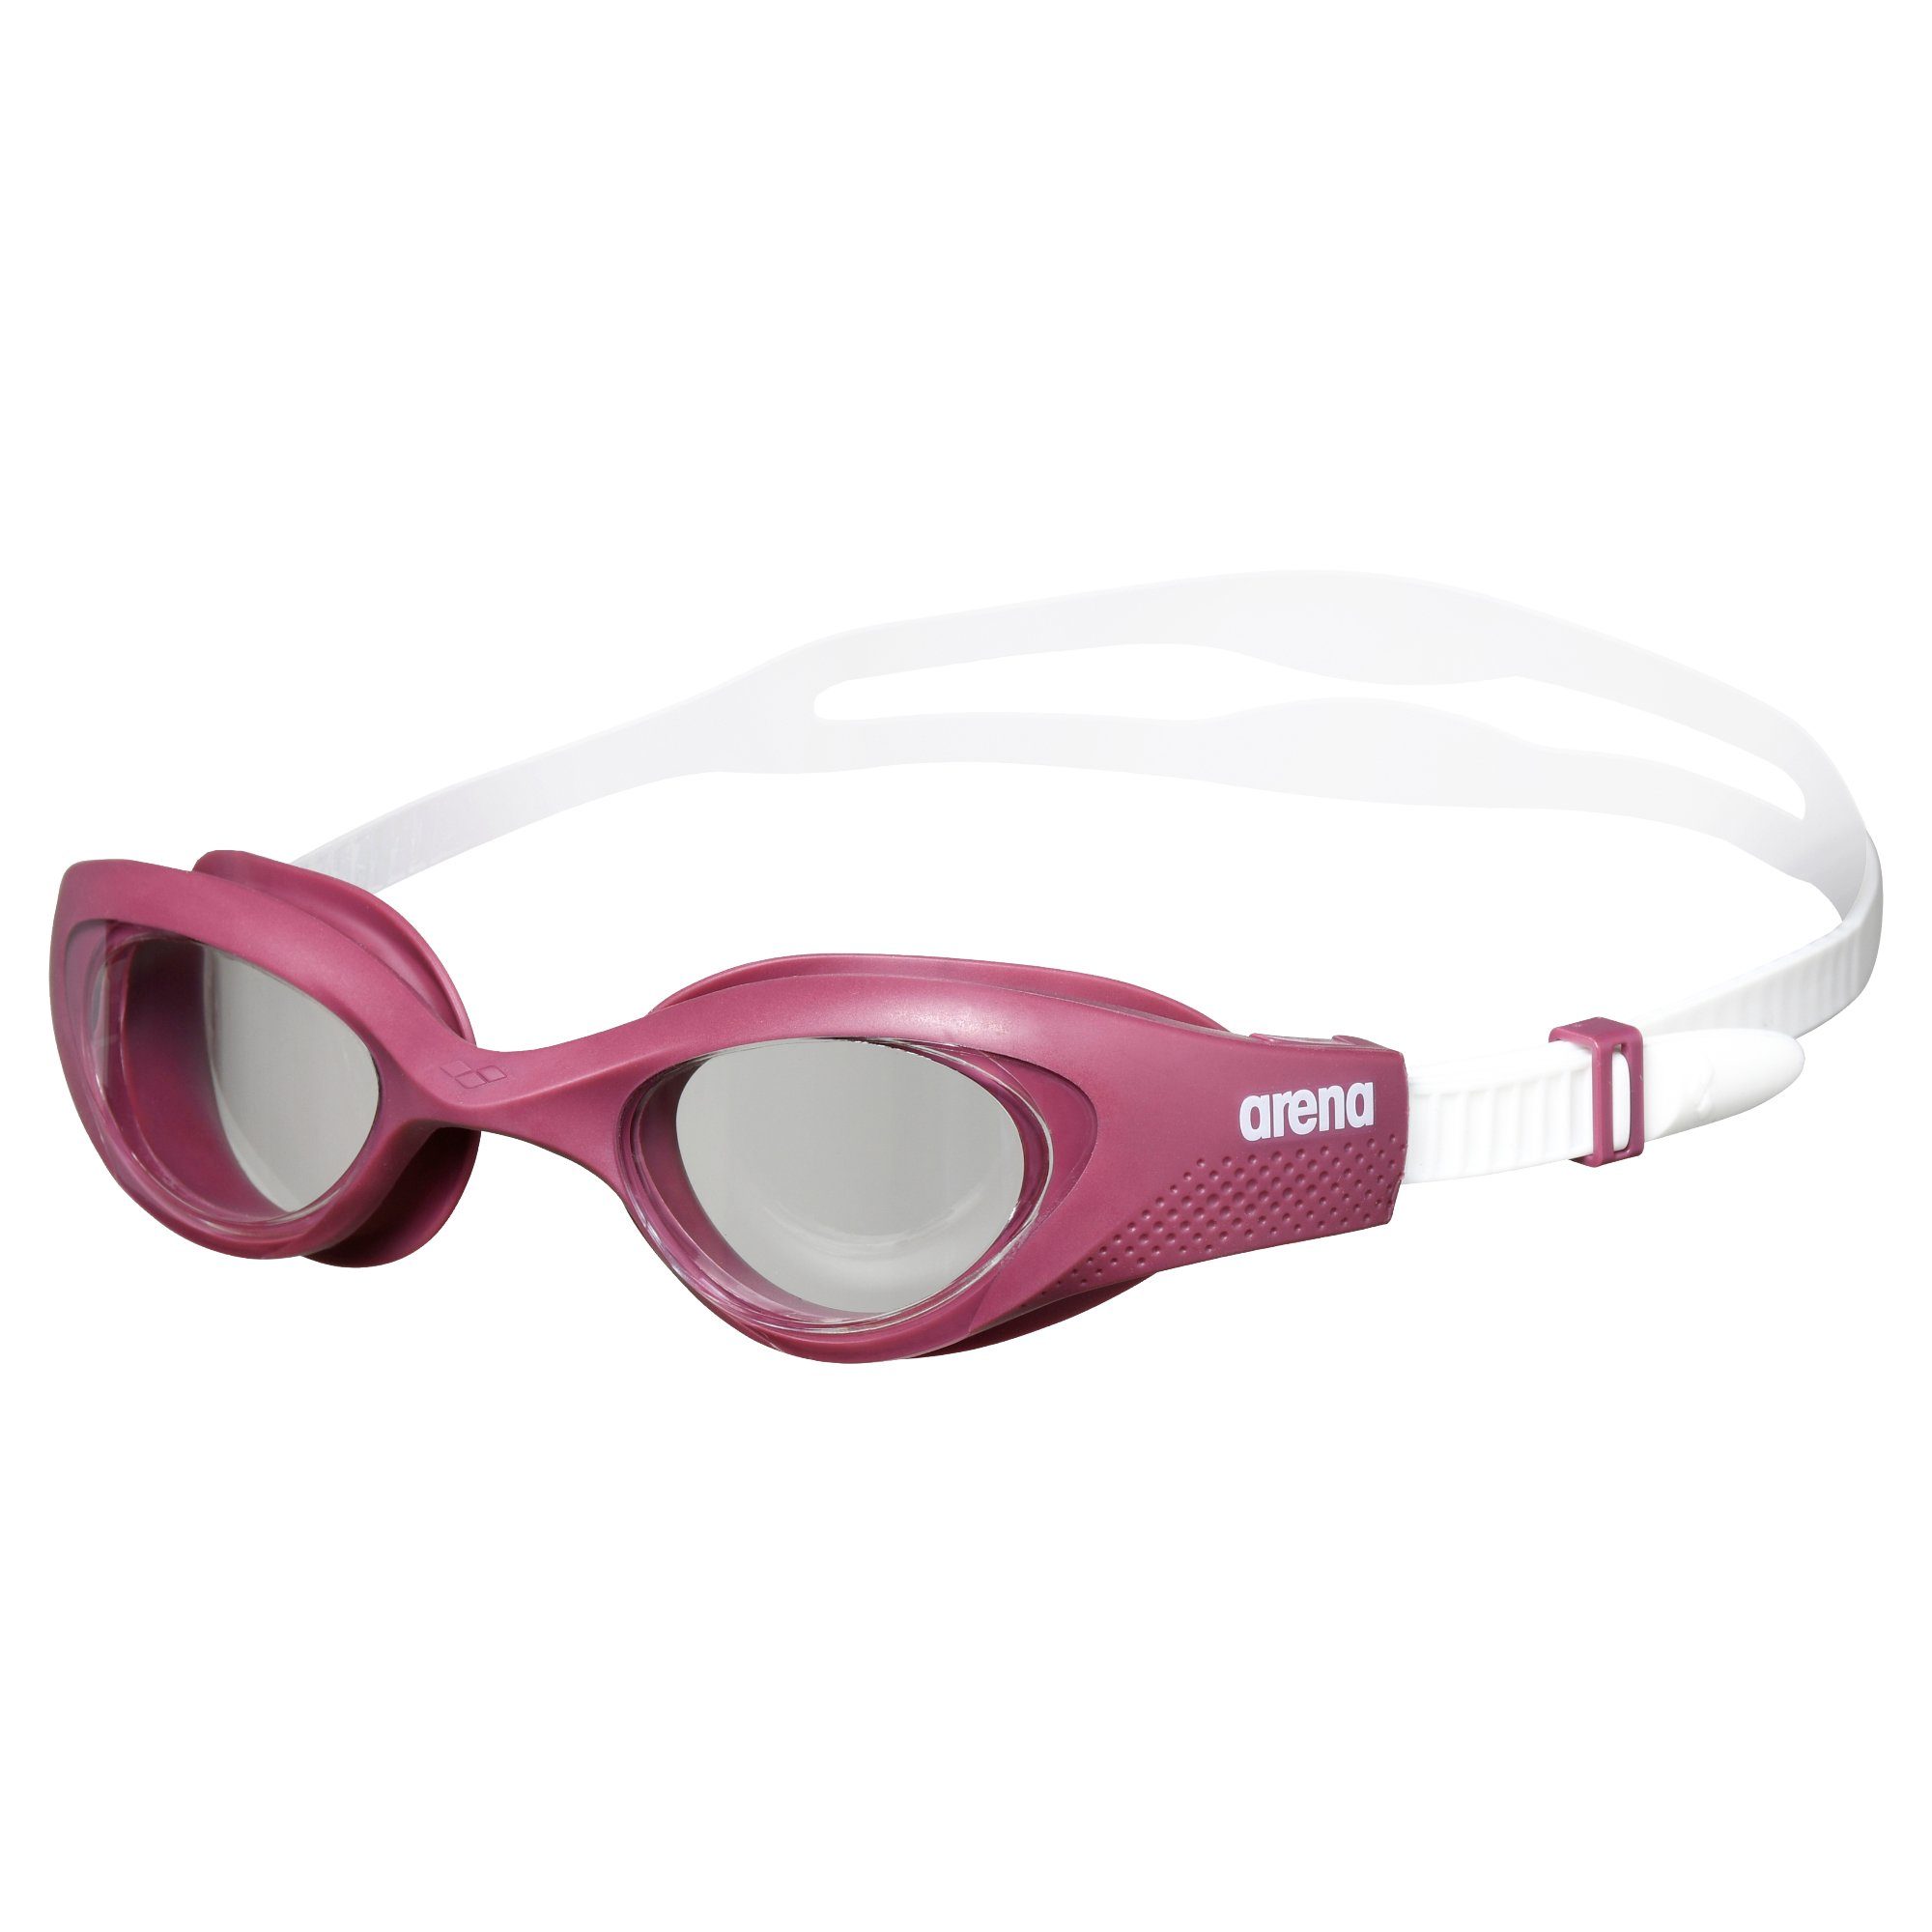 Schwimmbrille wine-white clear-red Arena The Woman arena one